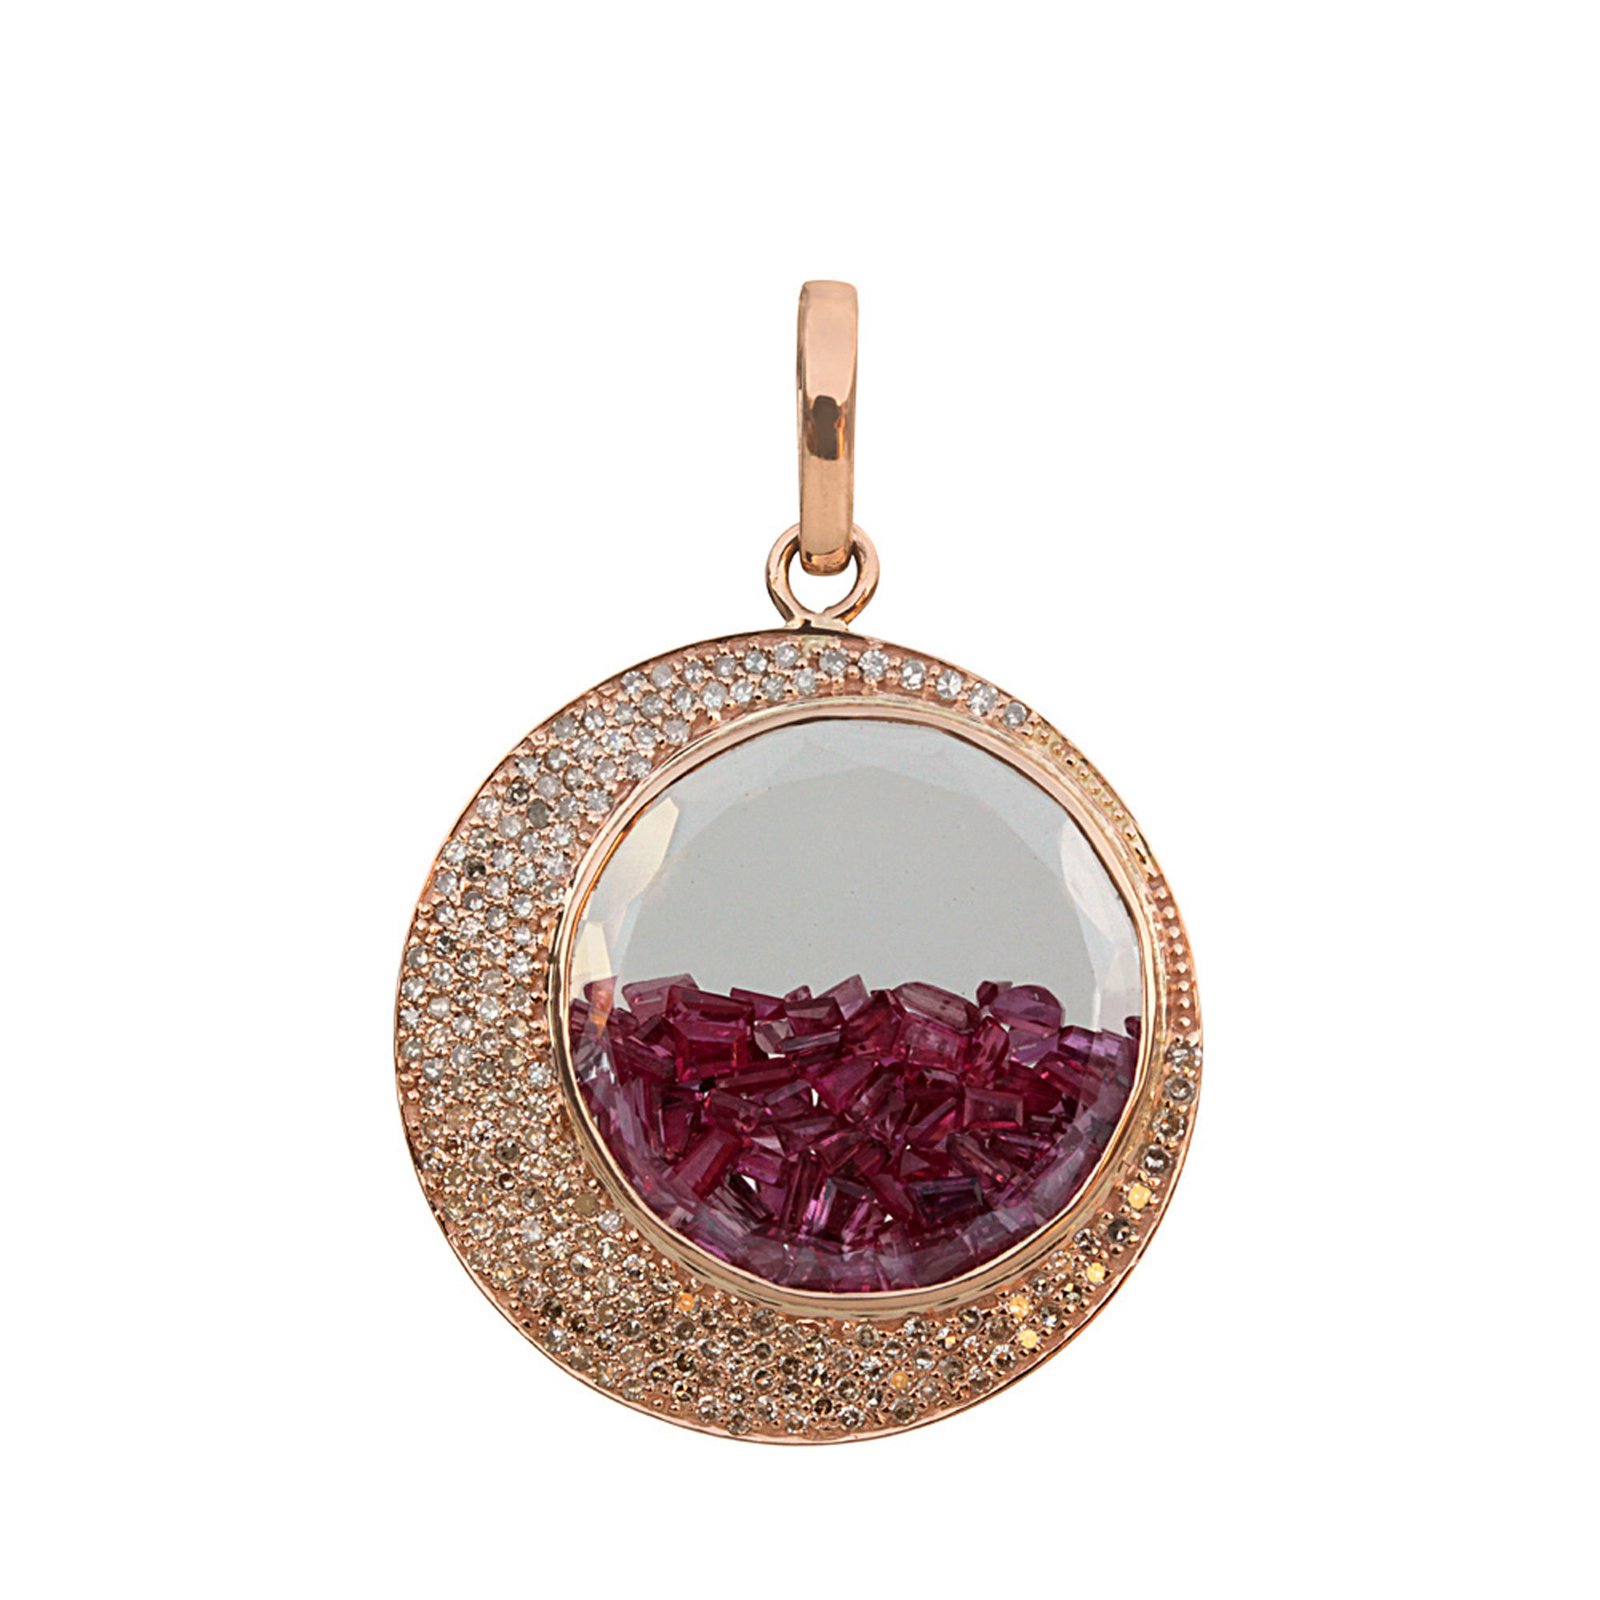 Ruby crystal shaker pendant made in 18k solid gold & diamond